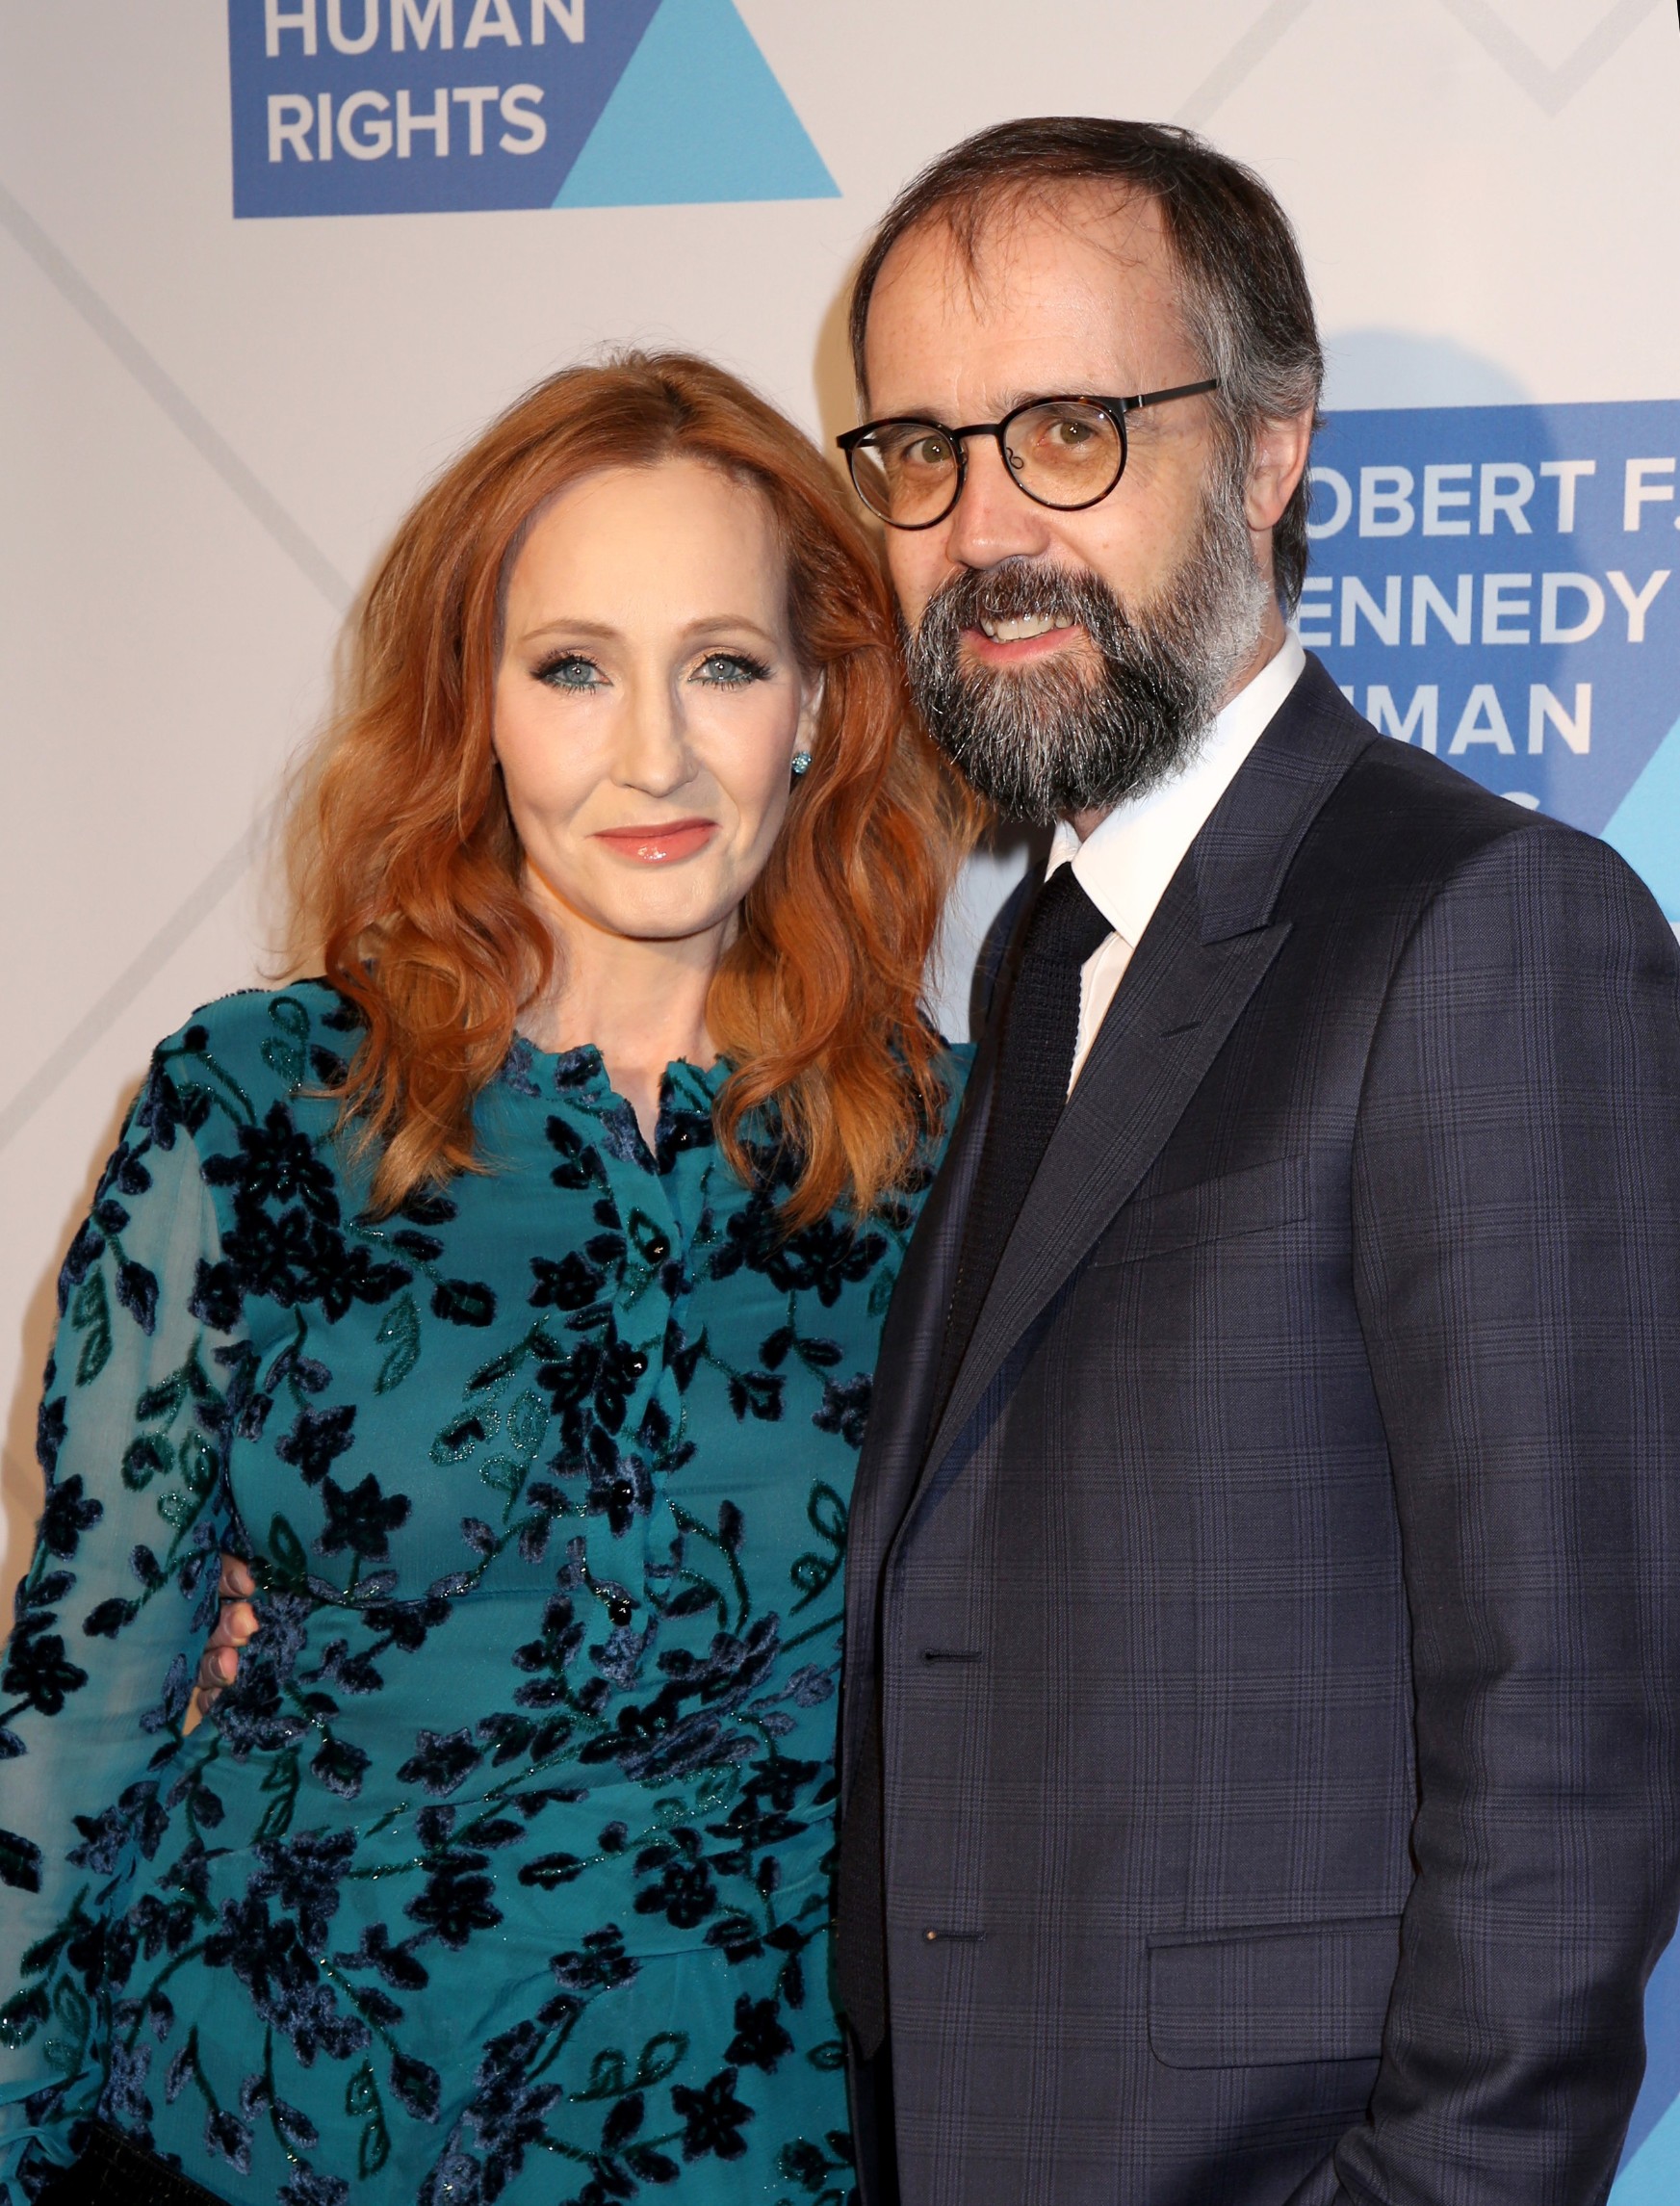 2019 RFK Ripple of Hope Awards held at New York Hilton Midtown on December 12, 2019 in New York City, NY
©Steven Bergman/AFF-USA.COM.
12 Dec 2019
K. Rowling & husband Neil Murray., Image: 487836663, License: Rights-managed, Restrictions: World Rights, Model Release: no, Credit line: Steven Bergman/AFF-USA.COM / MEGA / The Mega Agency / Profimedia